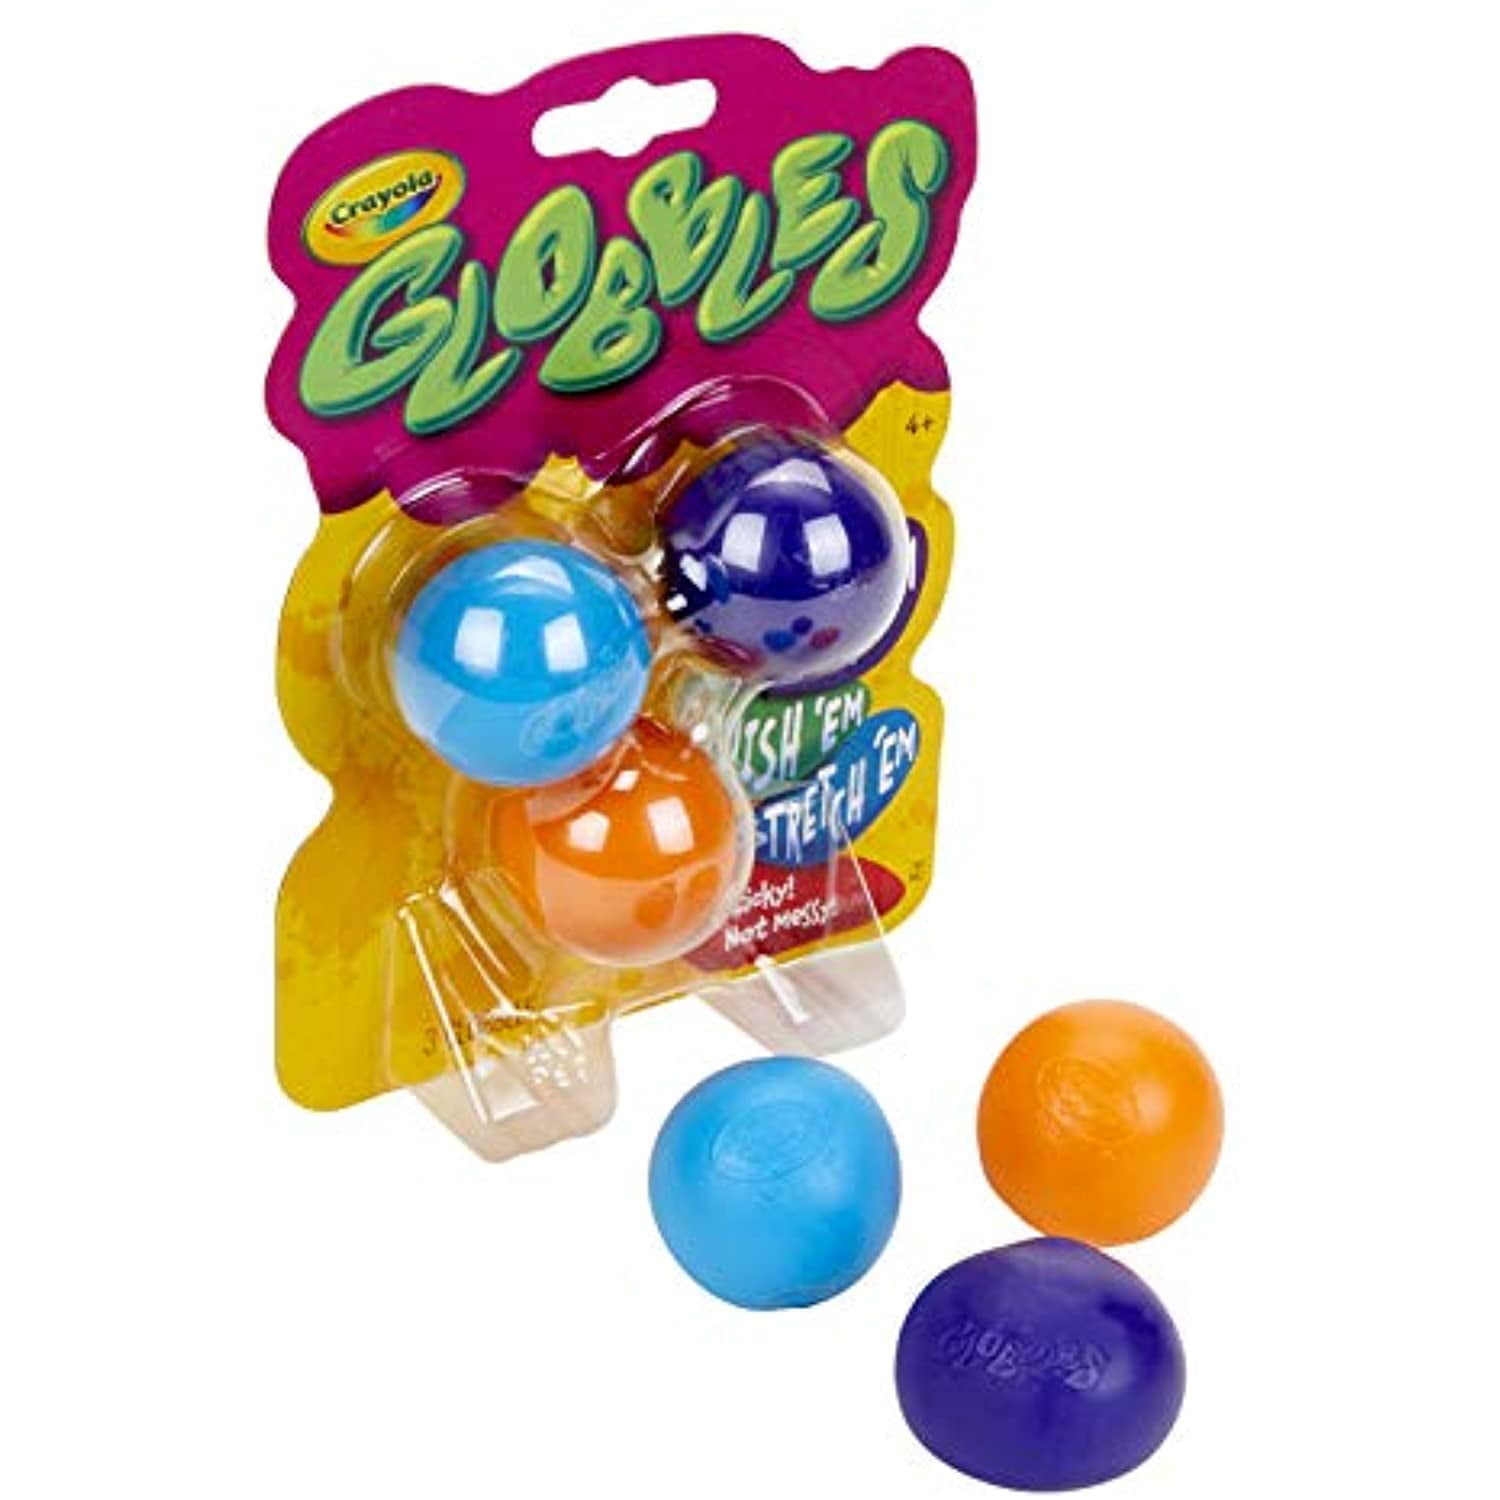 Globbles: Squish, stick, stack, or sling!